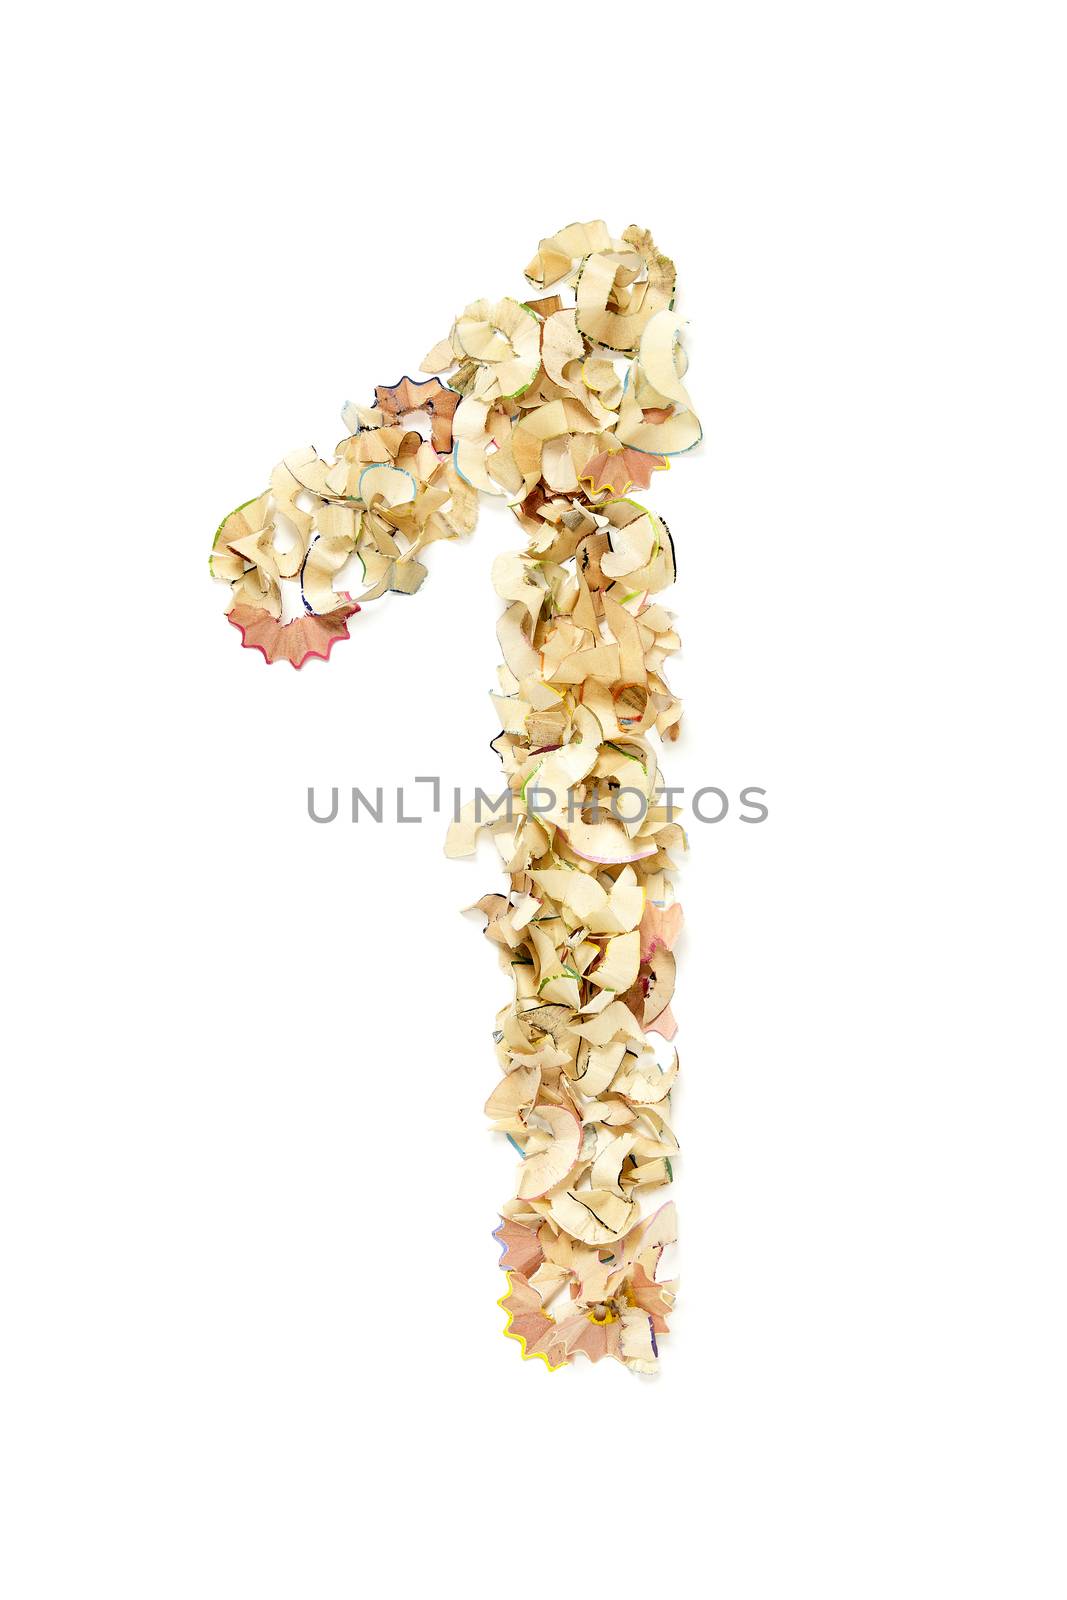 Number 1 made of pencil shavings by filipw